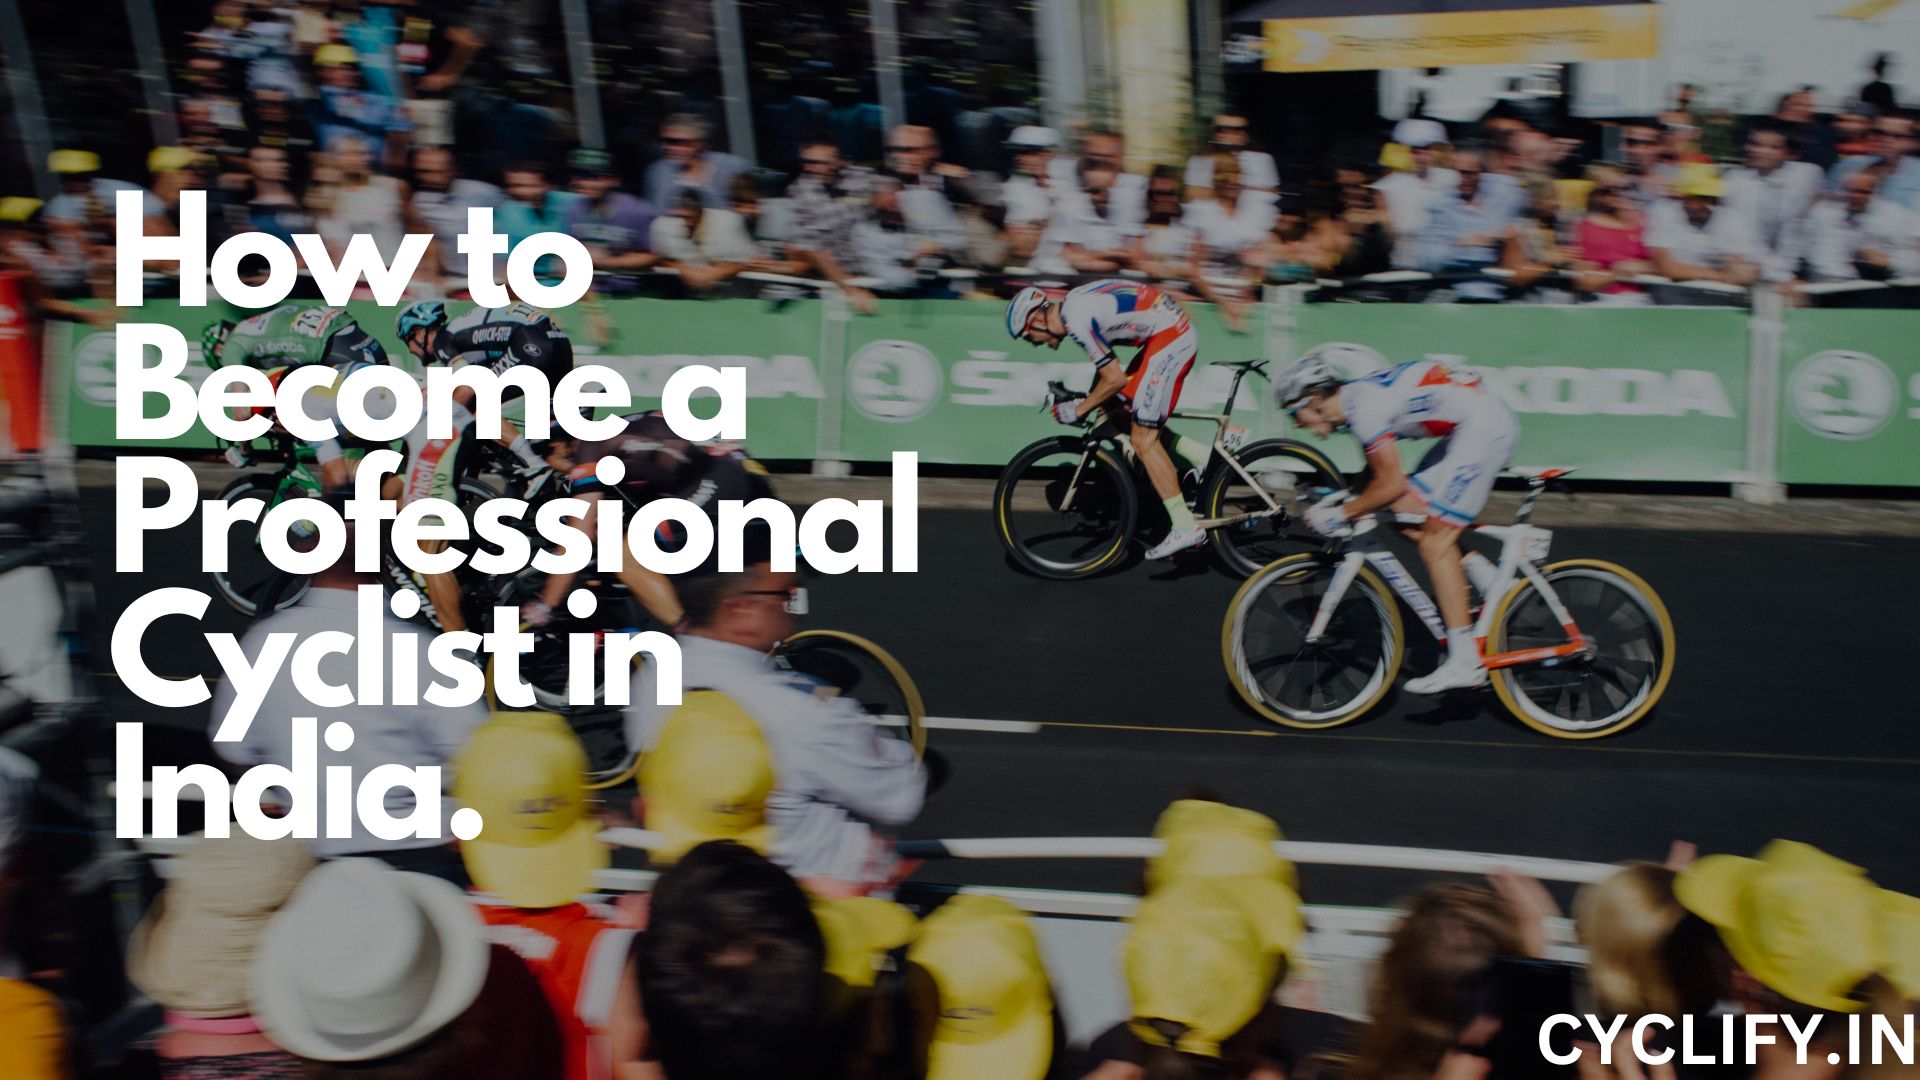 How to Become a Professional Cyclist in India.